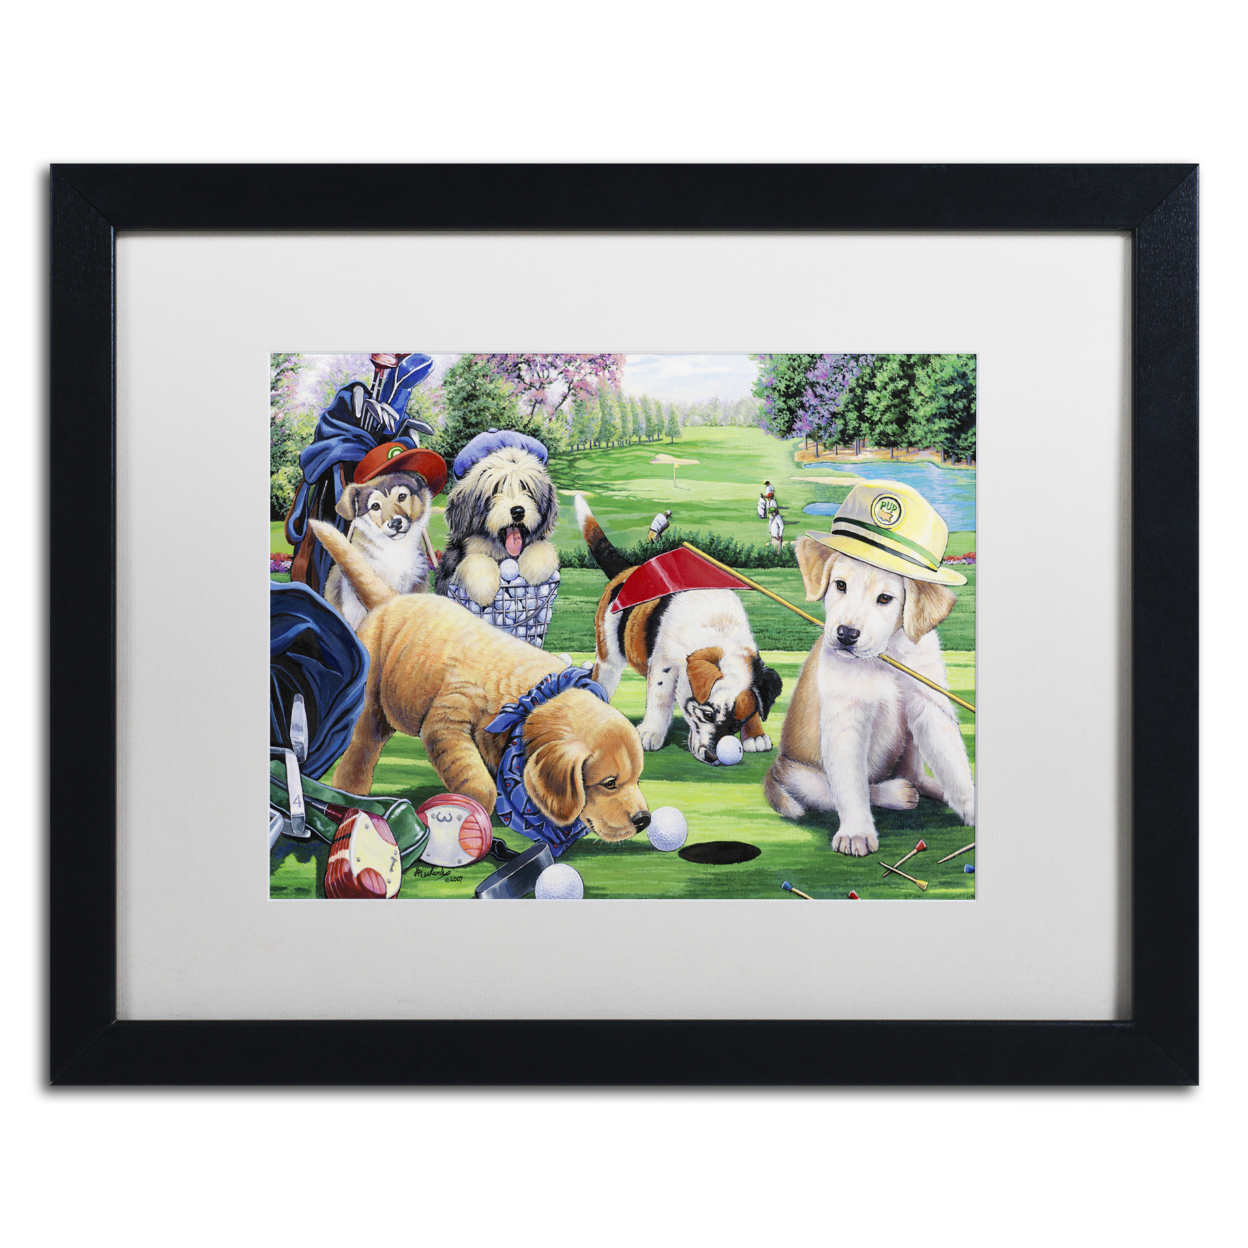 Jenny Newland 'Golfing Puppies' Black Wooden Framed Art 18 X 22 Inches